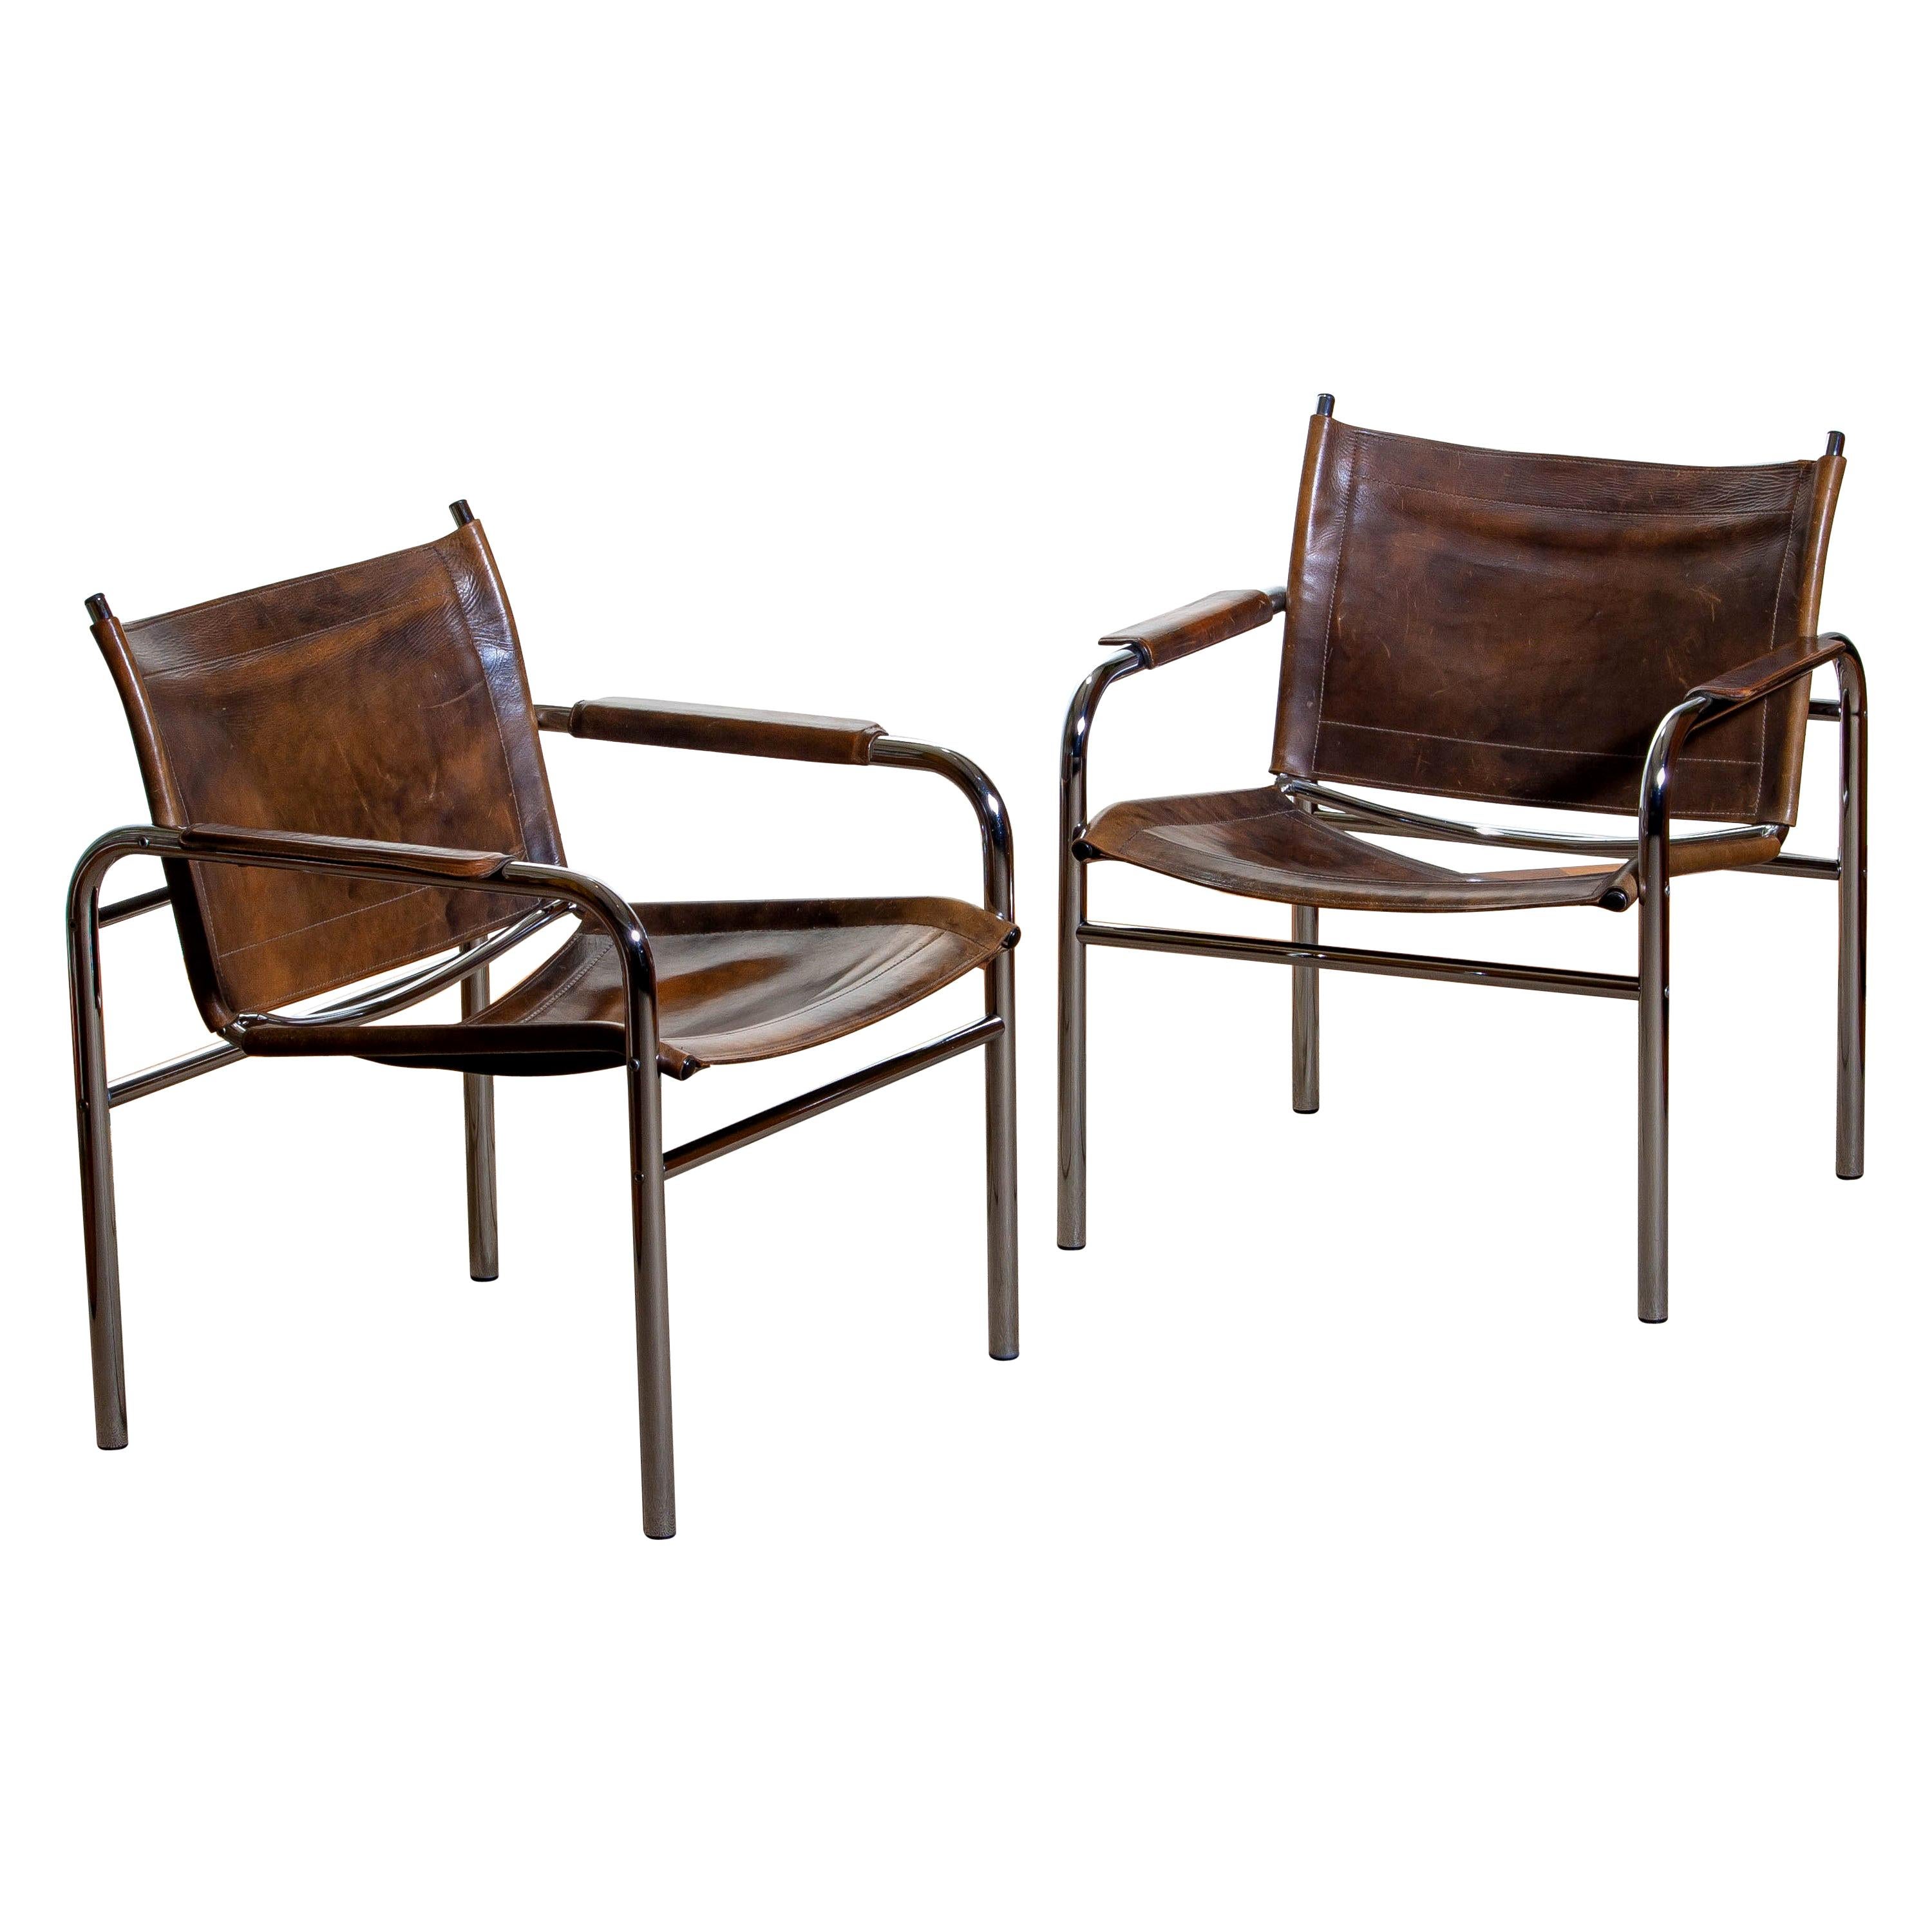 Mid-Century Modern 1980s, Pair of Leather and Tubular Steel Armchairs by Tord Bjorklund, Sweden